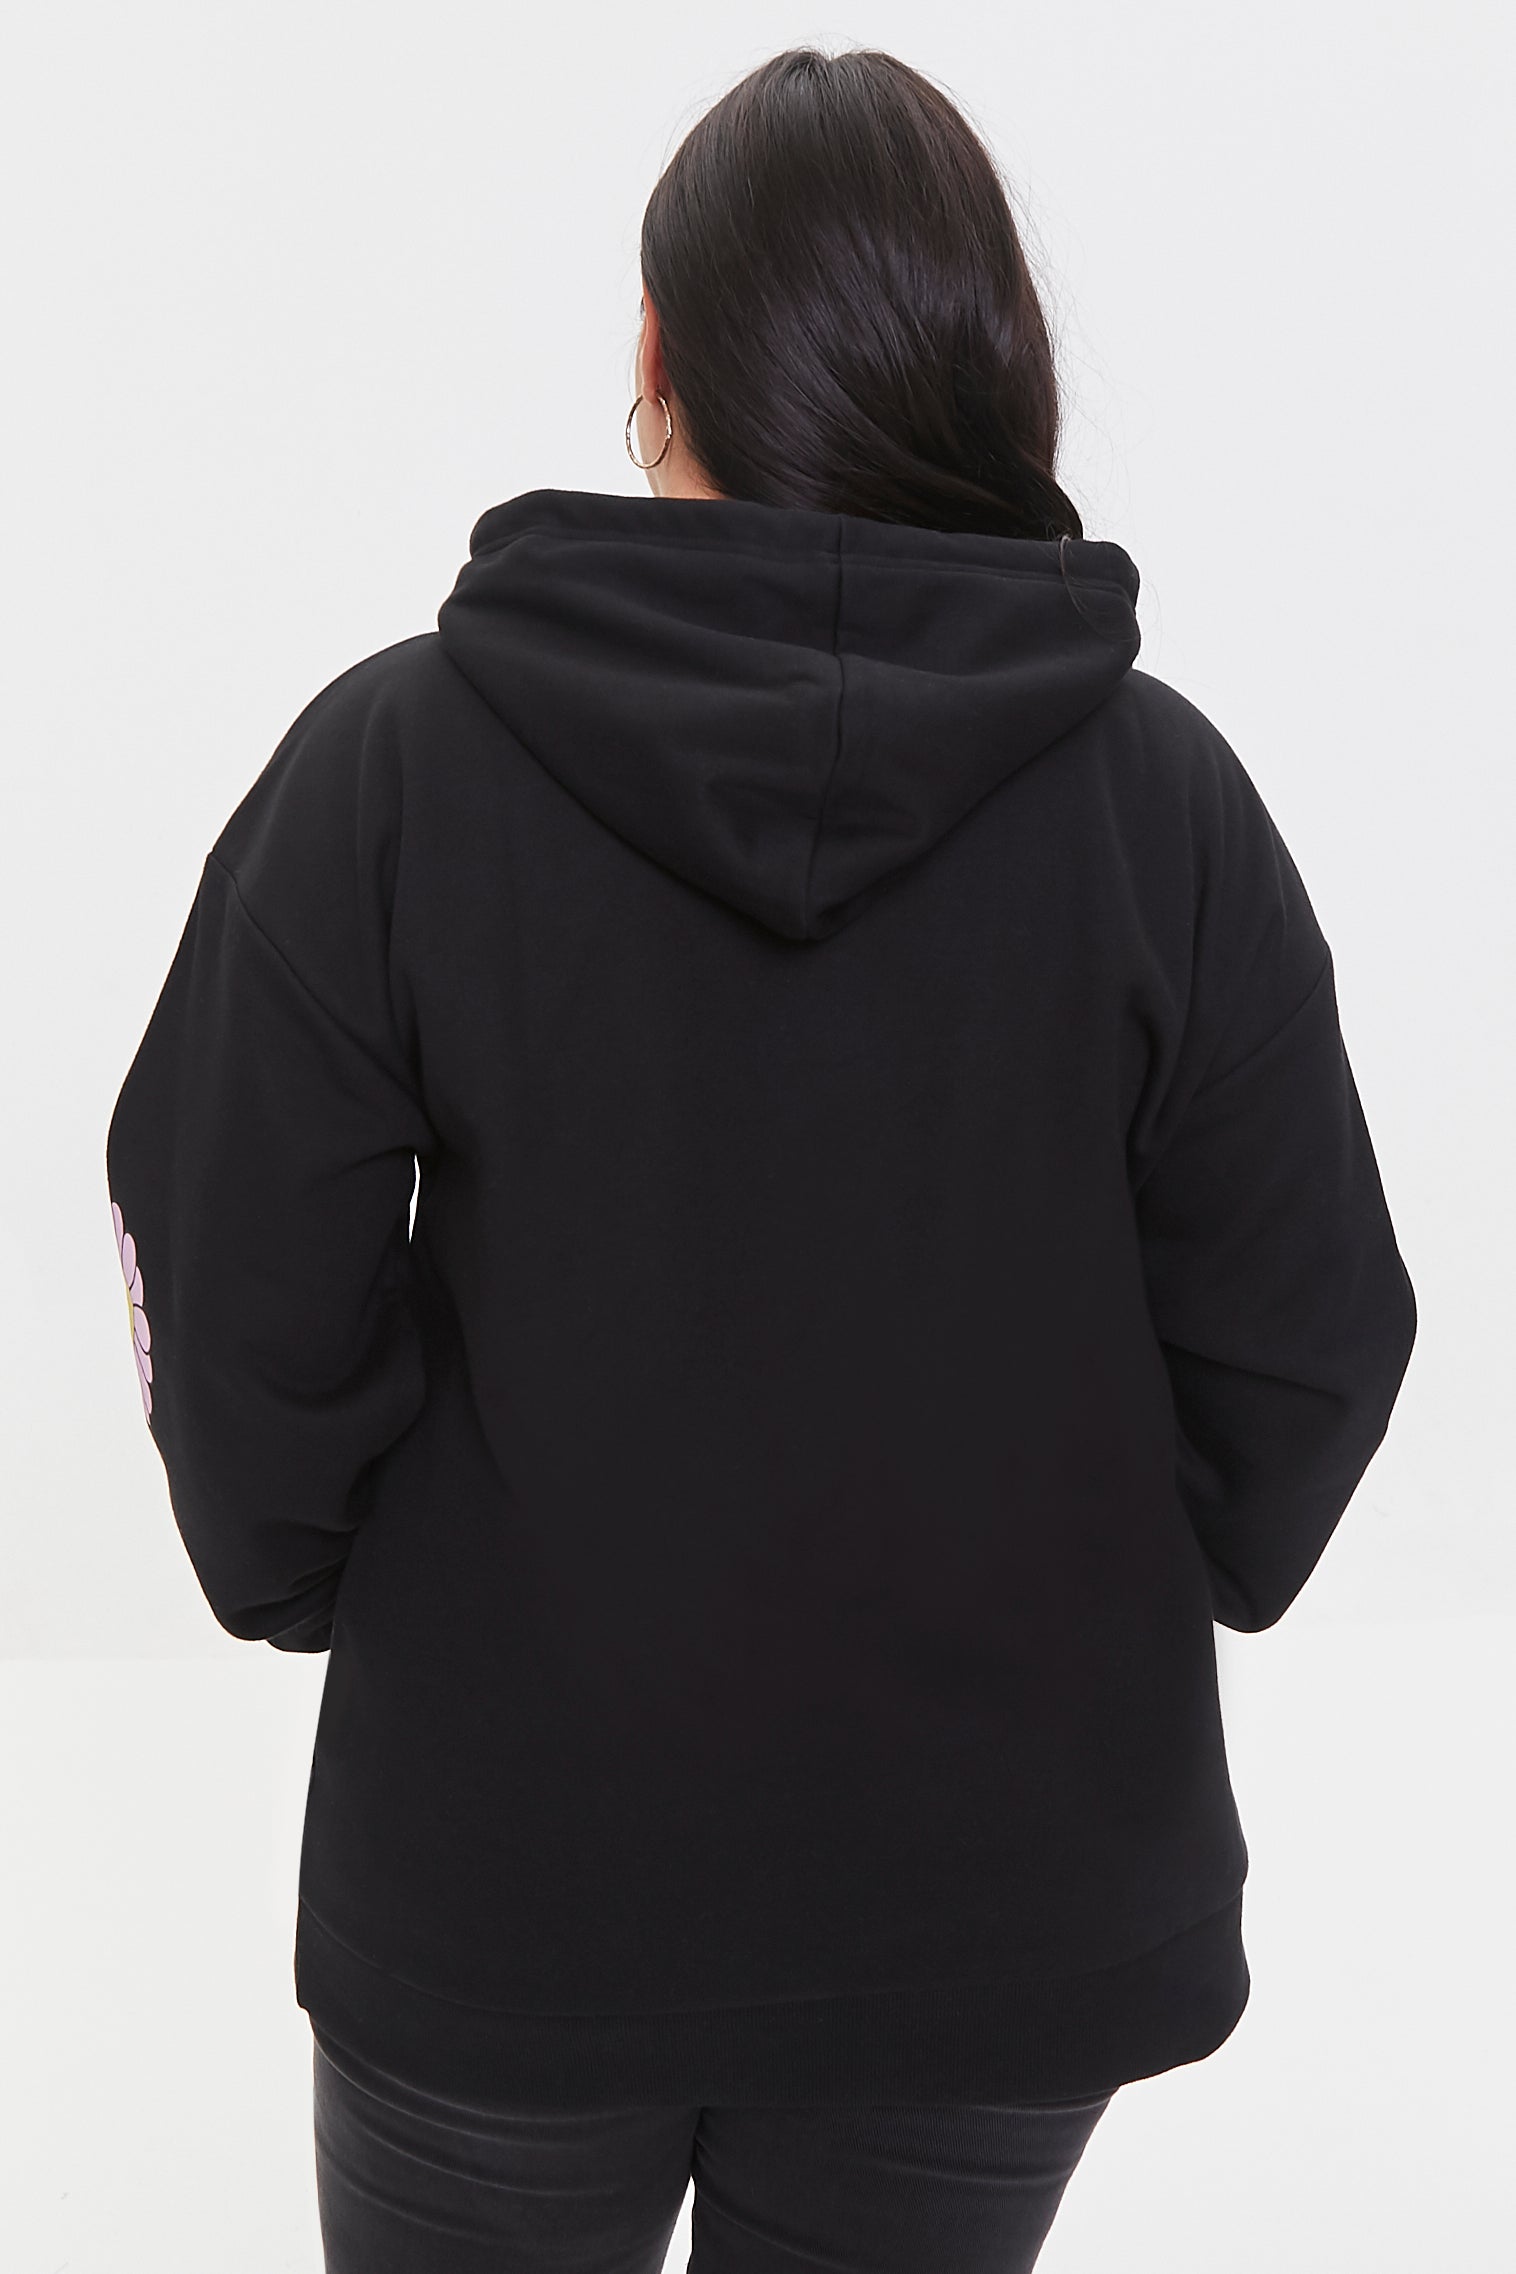 Blackmulti Plus Size In My Happy Place Hoodie 3